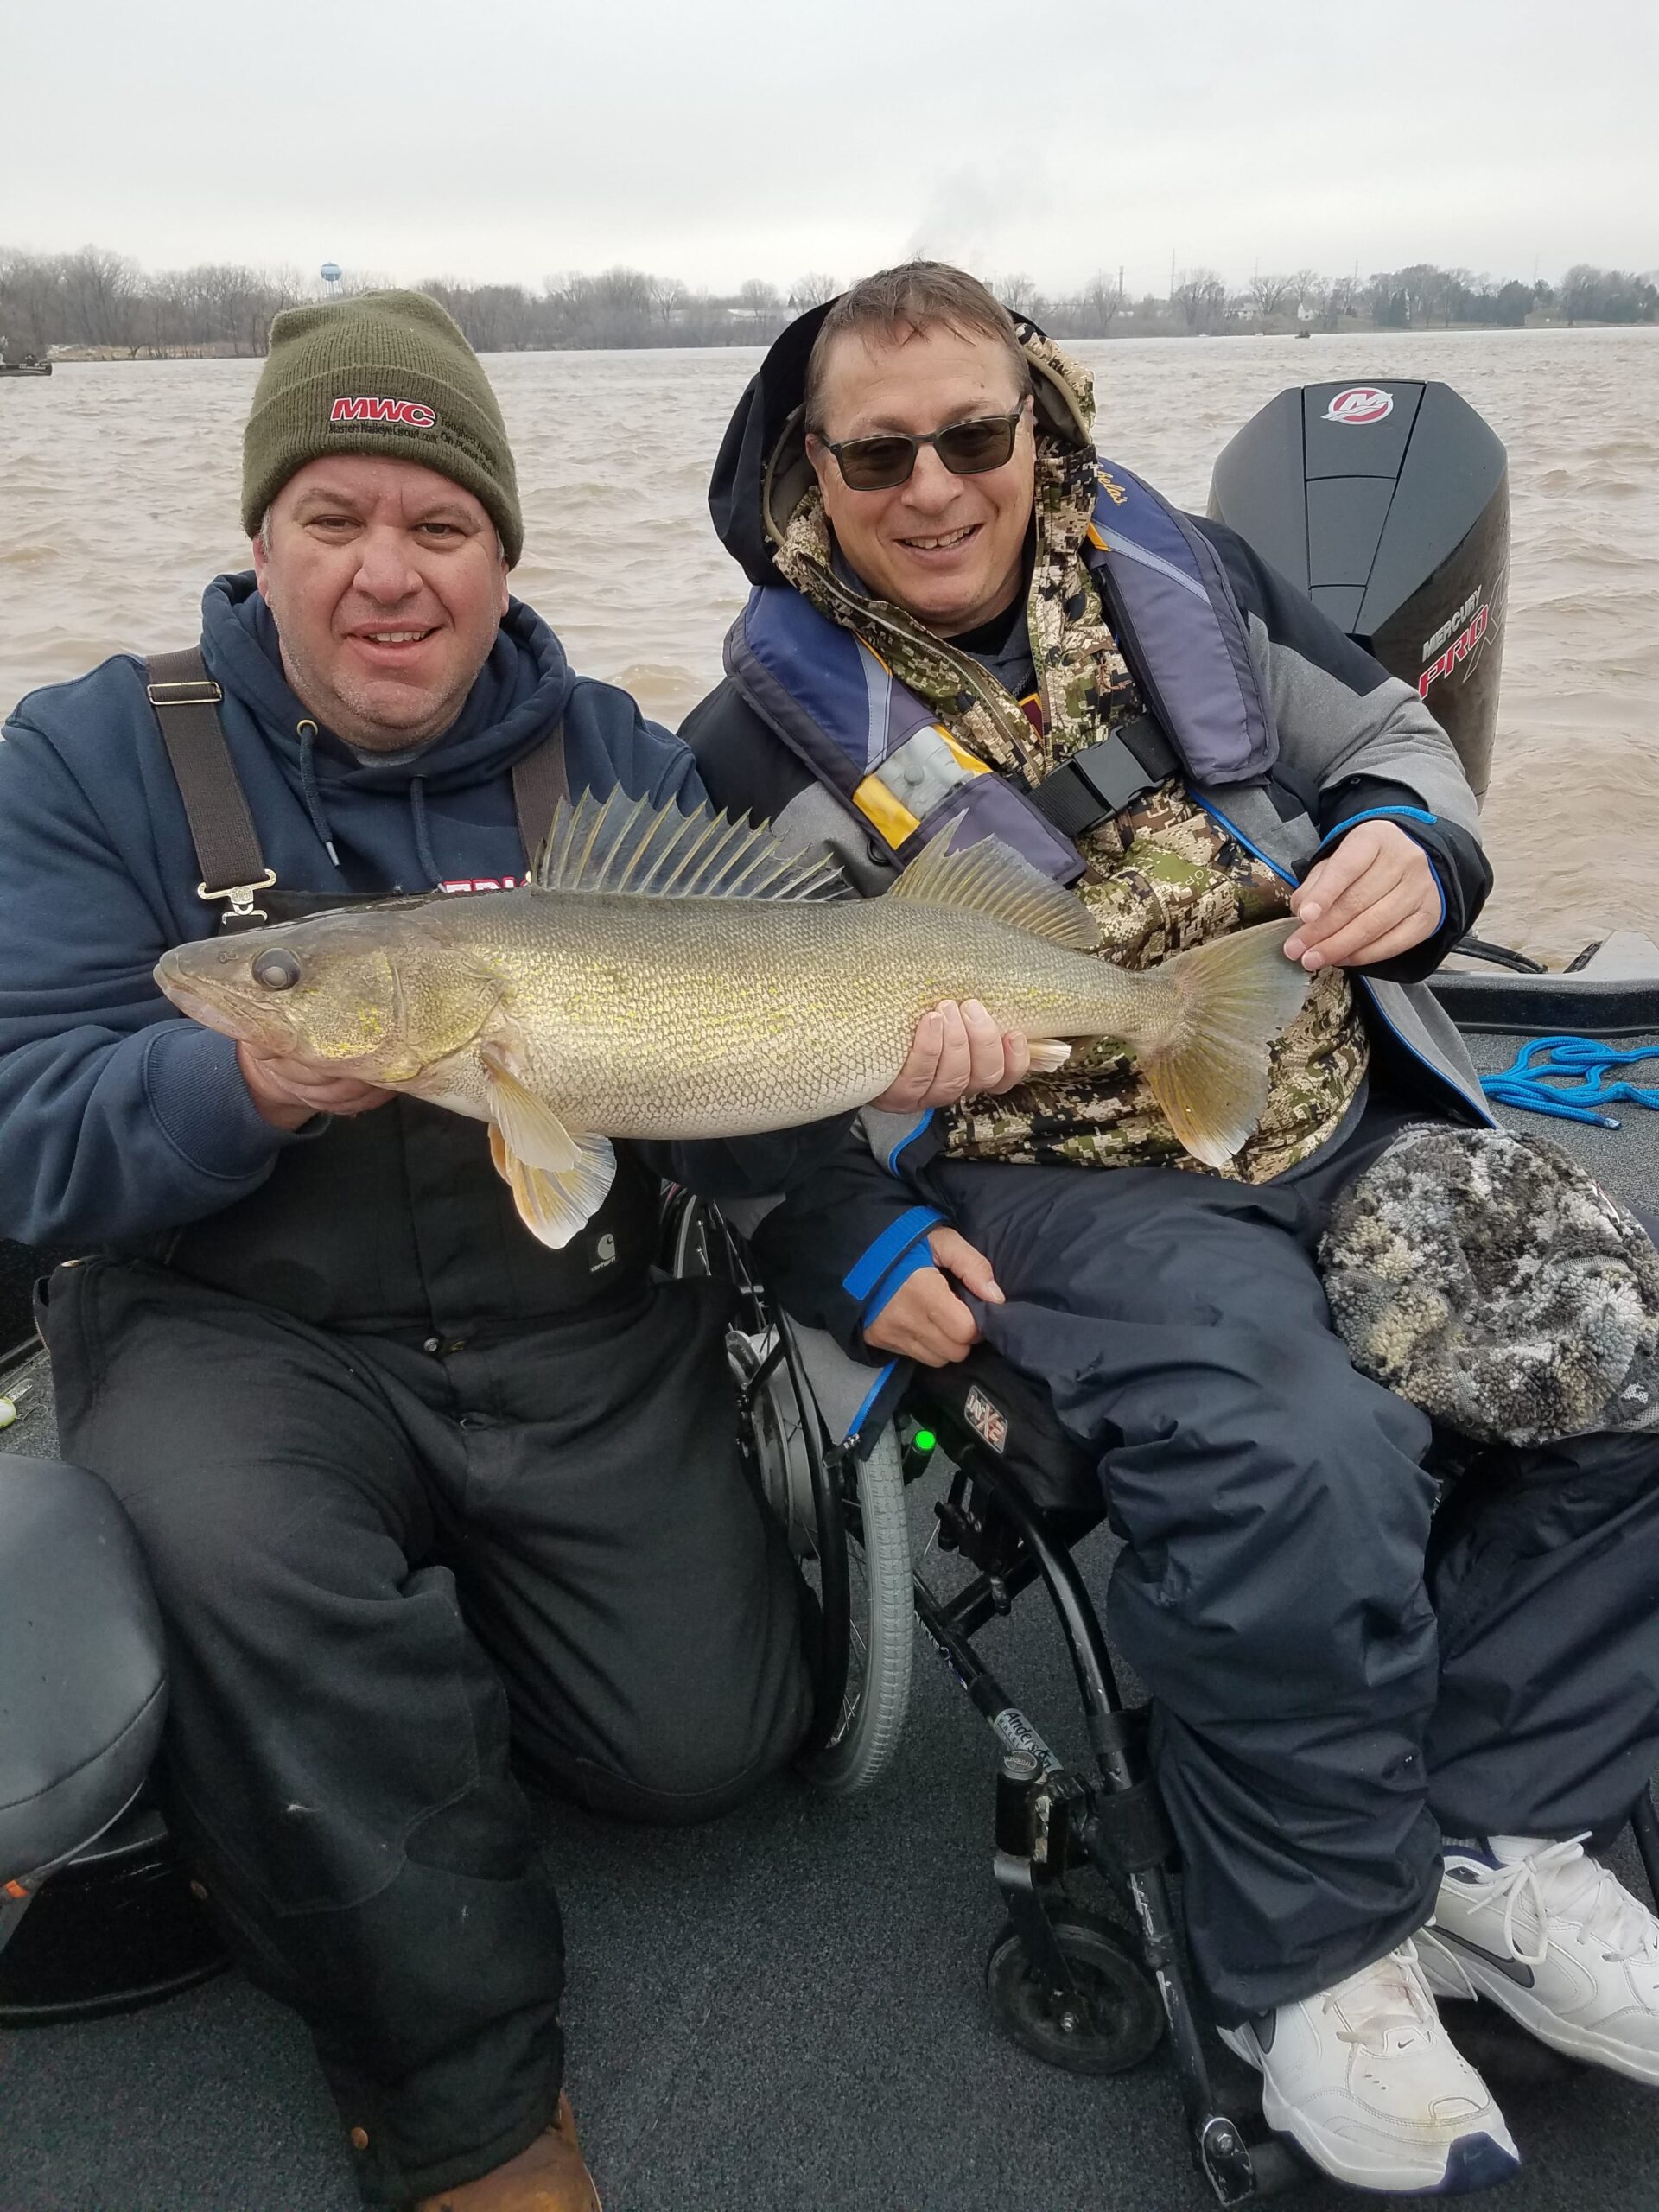 Mississippi River Walleye Charters - Kujawa Outdoors - Home